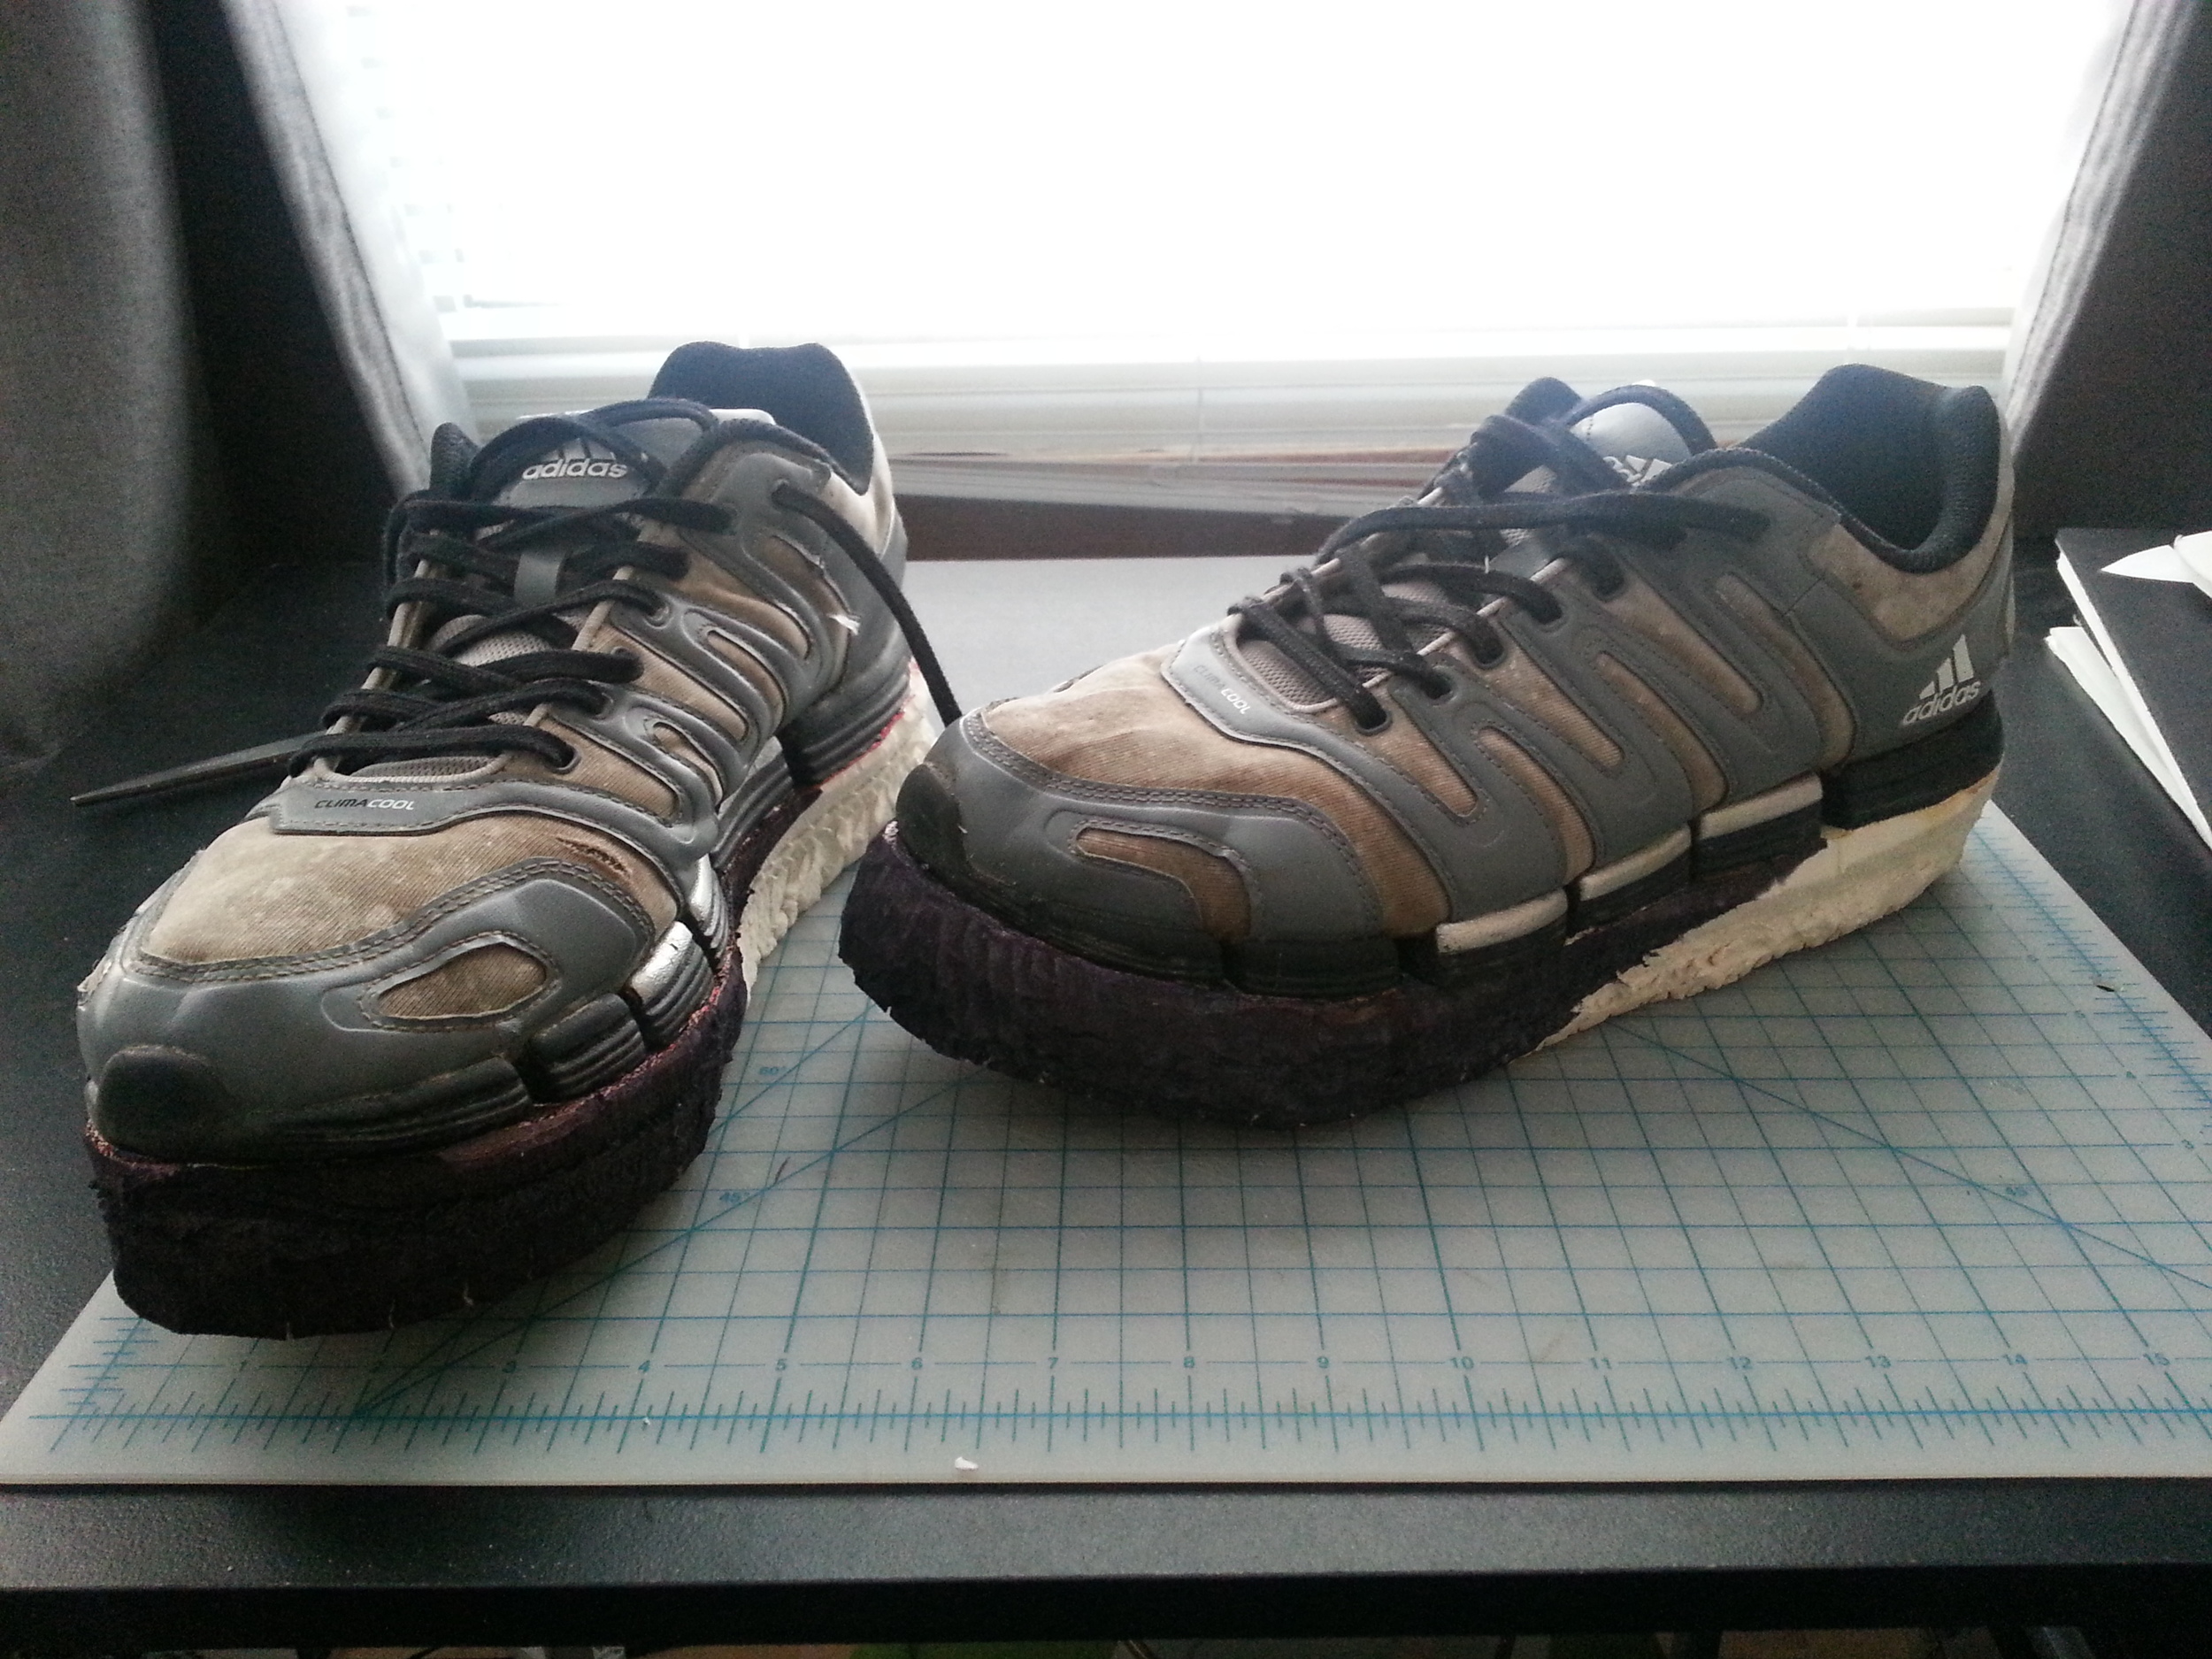  I thought that I should add some flare to the rough exposed white foam sole. It was late and the Sharpie was handy! 